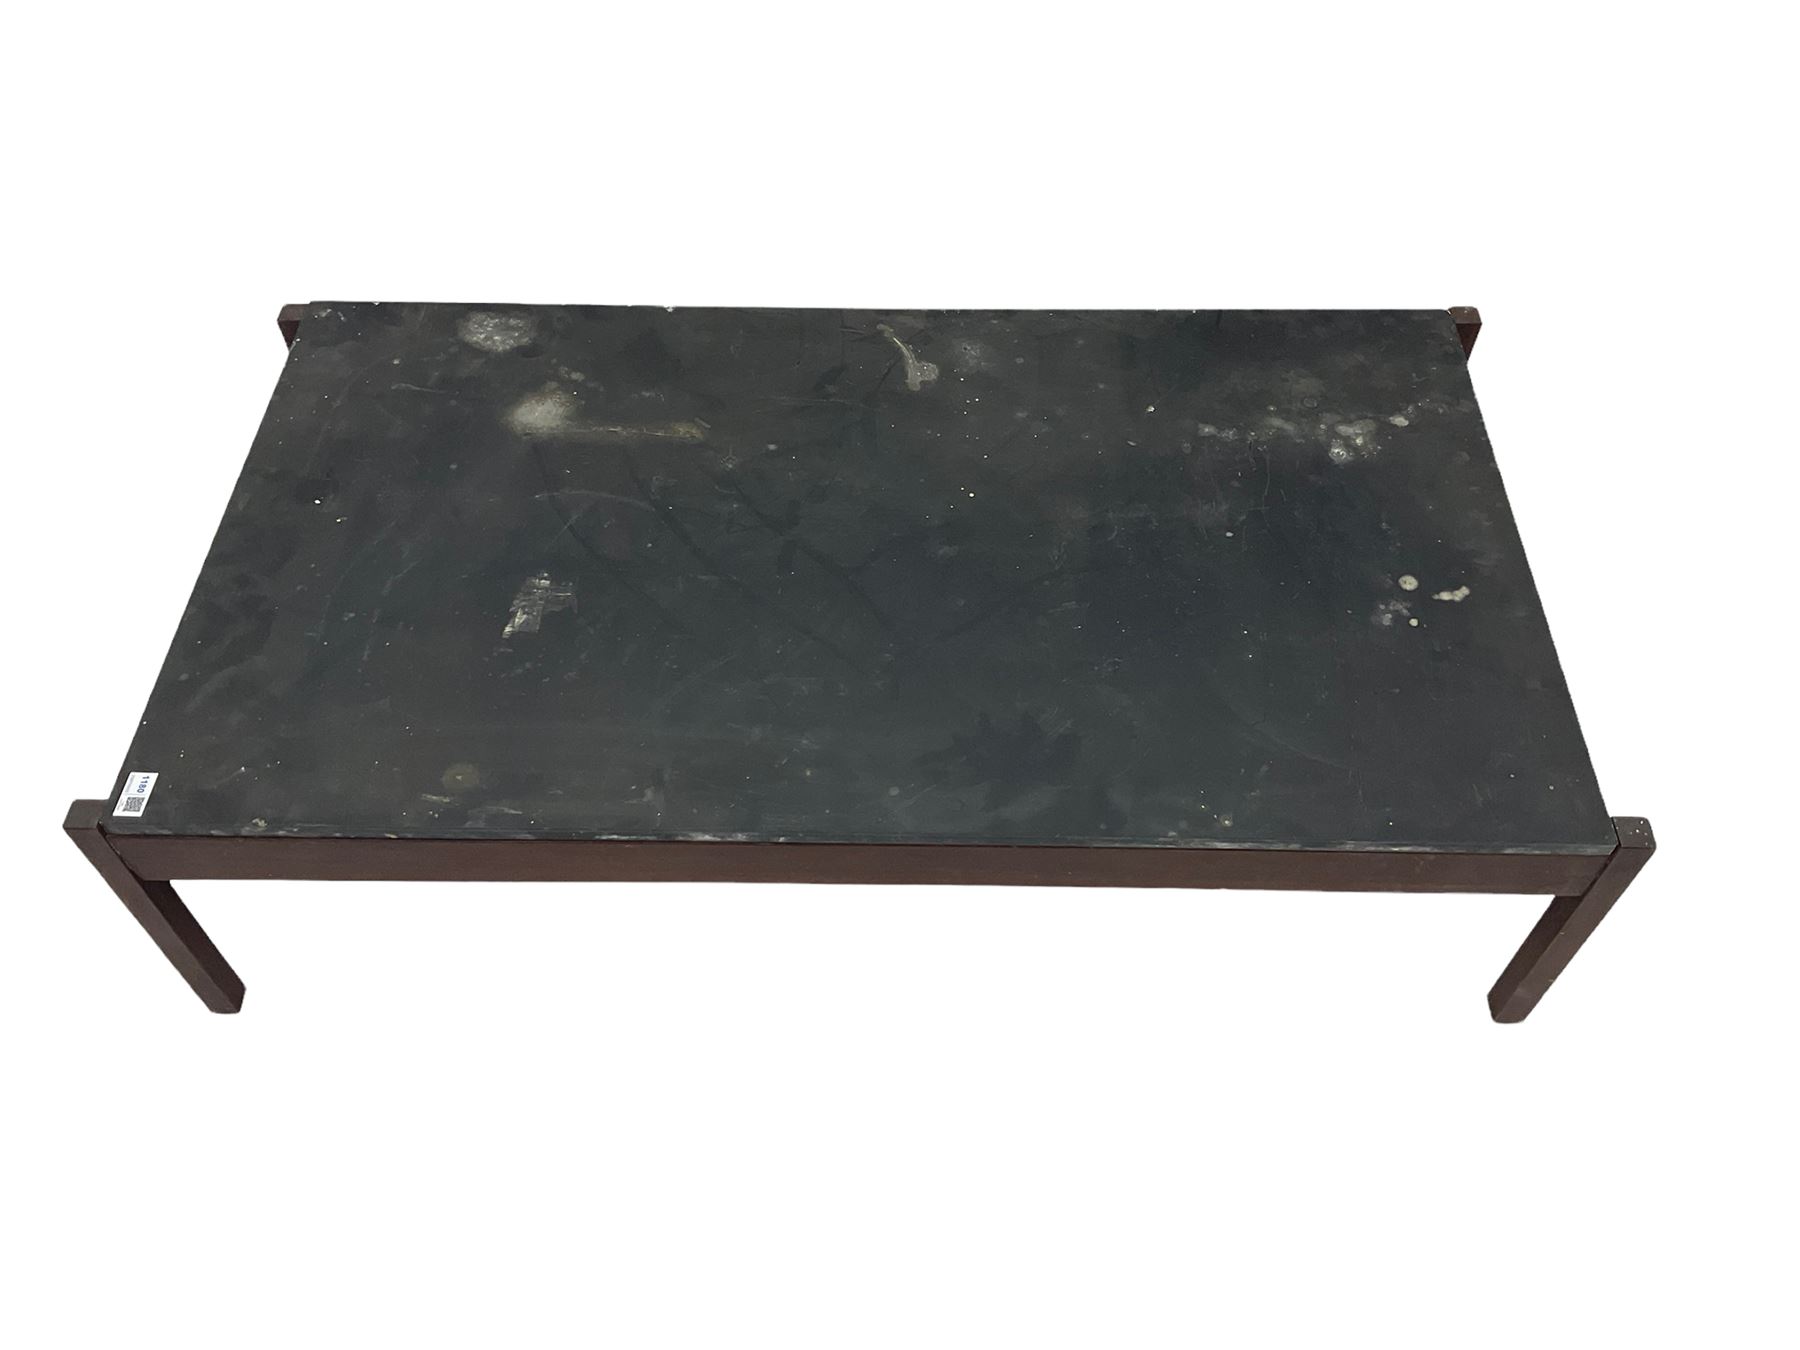 Mid-20th century rectangular teak coffee table with black lacquered top (117cm x 61cm - Image 6 of 8